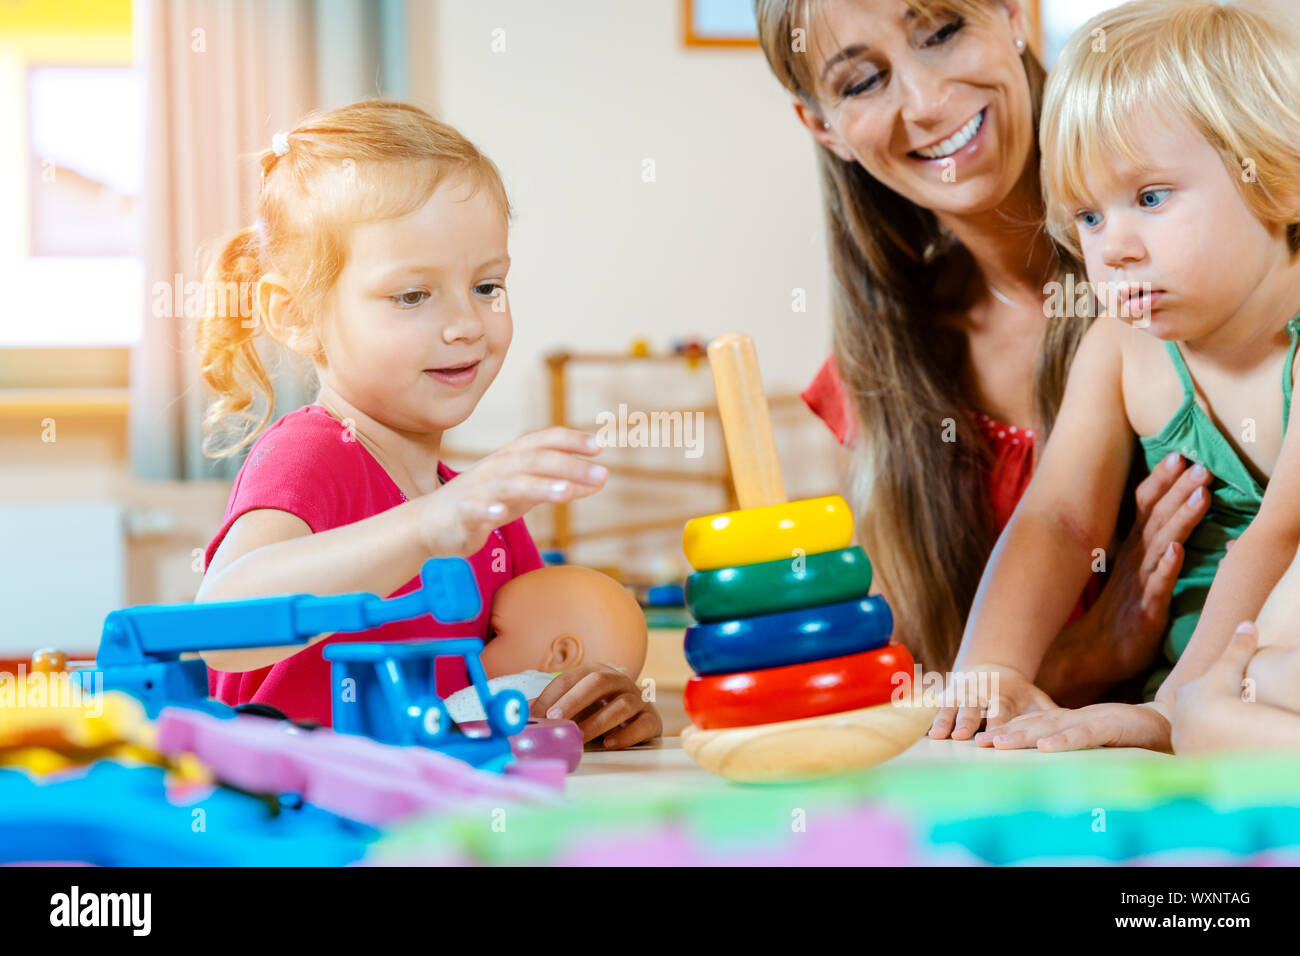 Children in nursery school learning and playing games Stock Photo